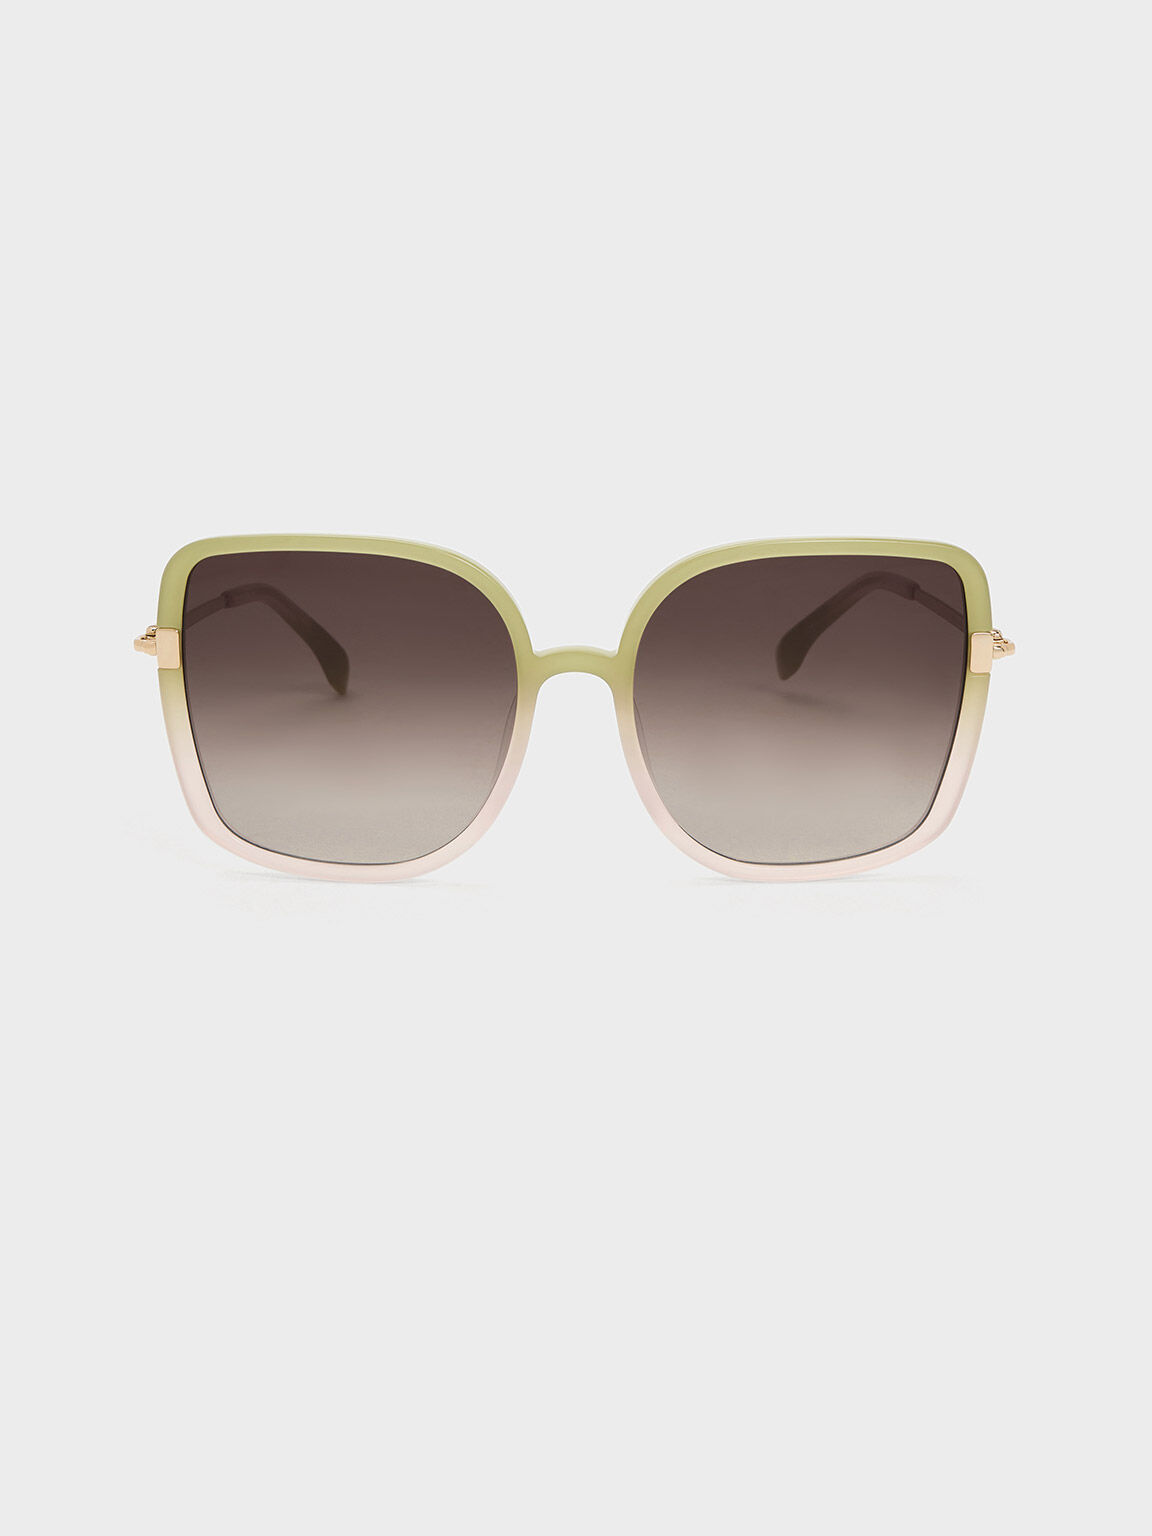 Women's Sunglasses | Exclusives Styles | CHARLES & KEITH UK